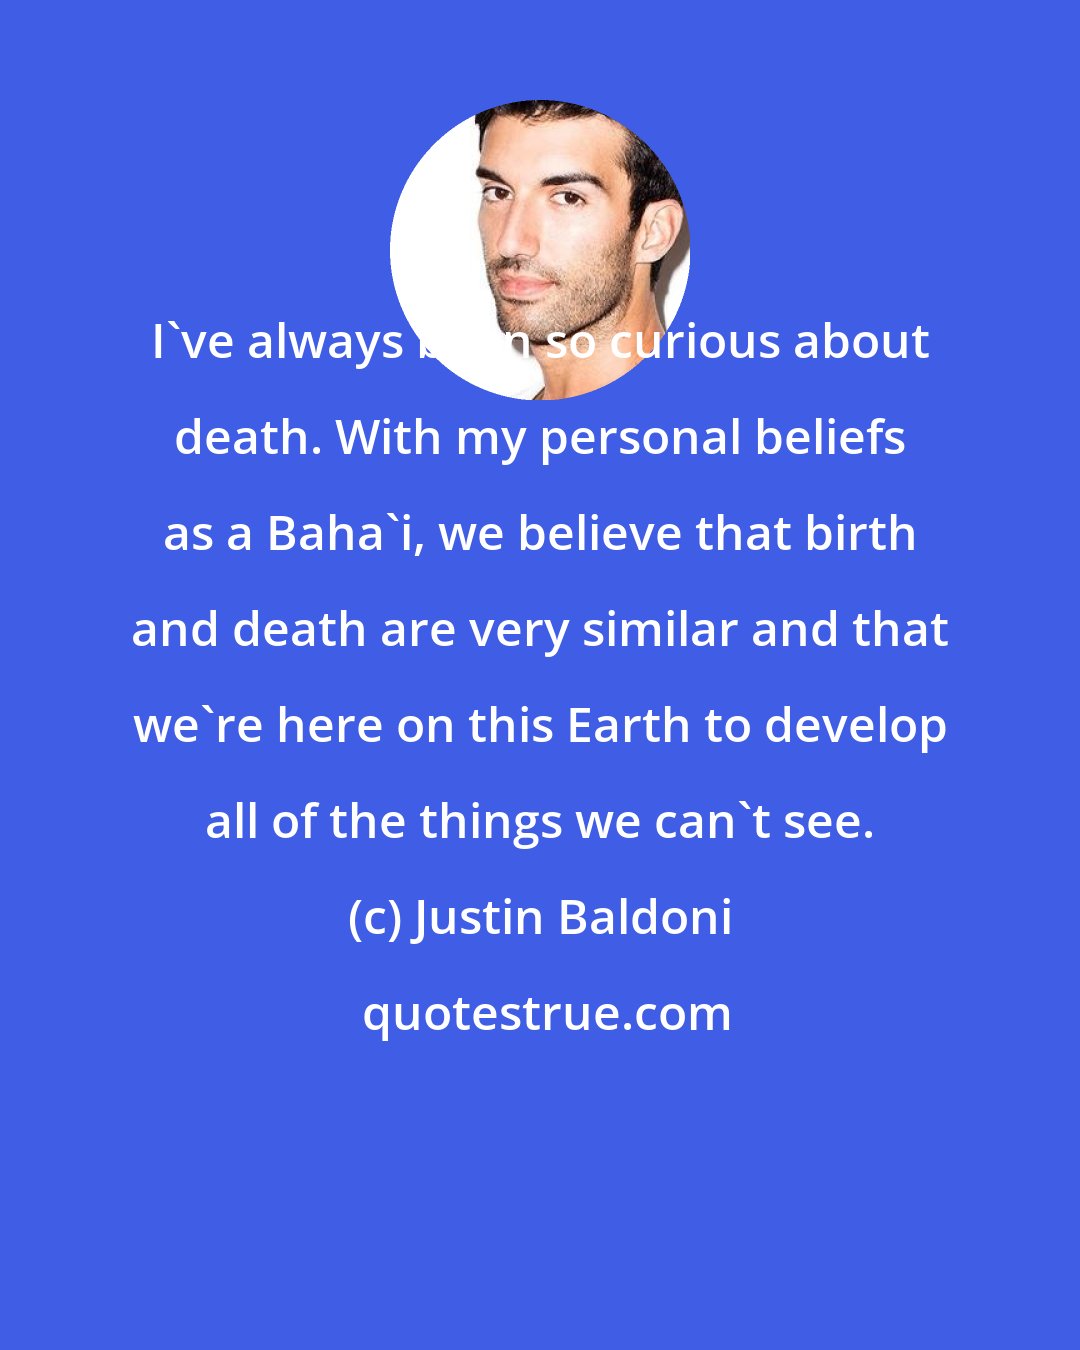 Justin Baldoni: I've always been so curious about death. With my personal beliefs as a Baha'i, we believe that birth and death are very similar and that we're here on this Earth to develop all of the things we can't see.